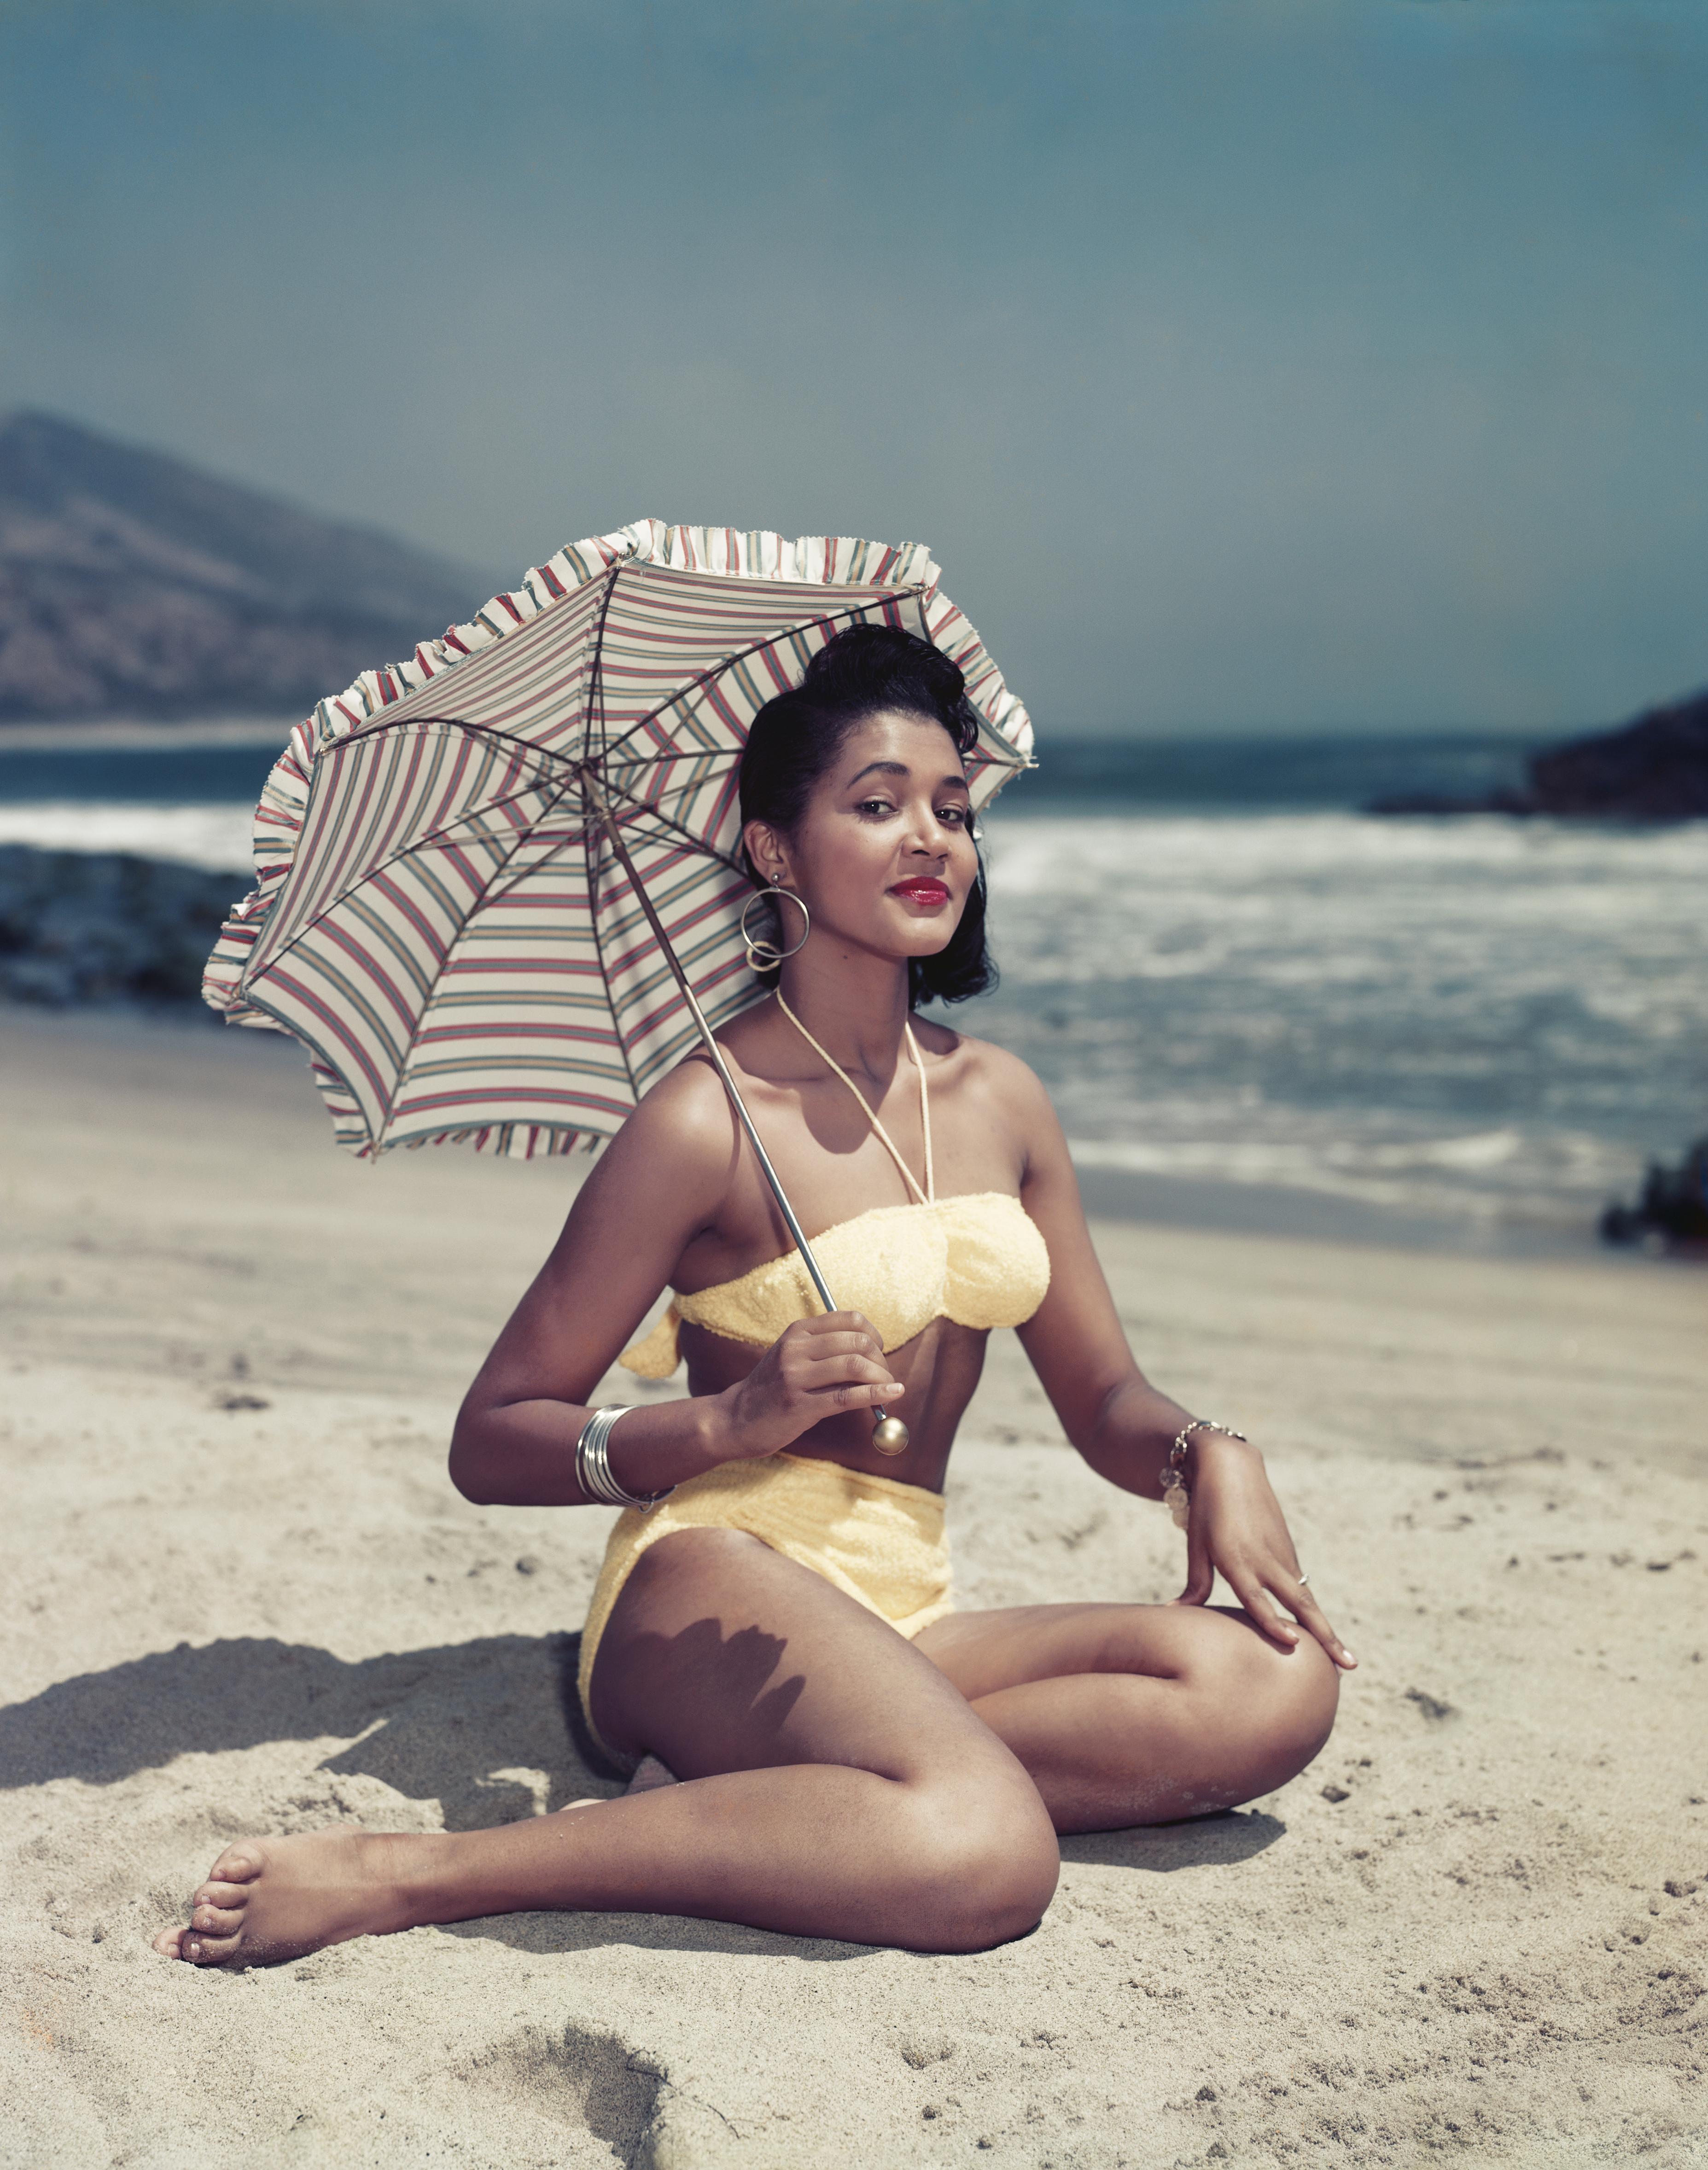 Tom Kelley
Woman With Umbrella
c. 1950's
C print
38 x 32 inches 

Caption: Woman in bikini sitting on beach holding umbrella, smiling, portrait. 

Tom Kelley’s interesting career spans more than four decades: first started as an apprentice in a New